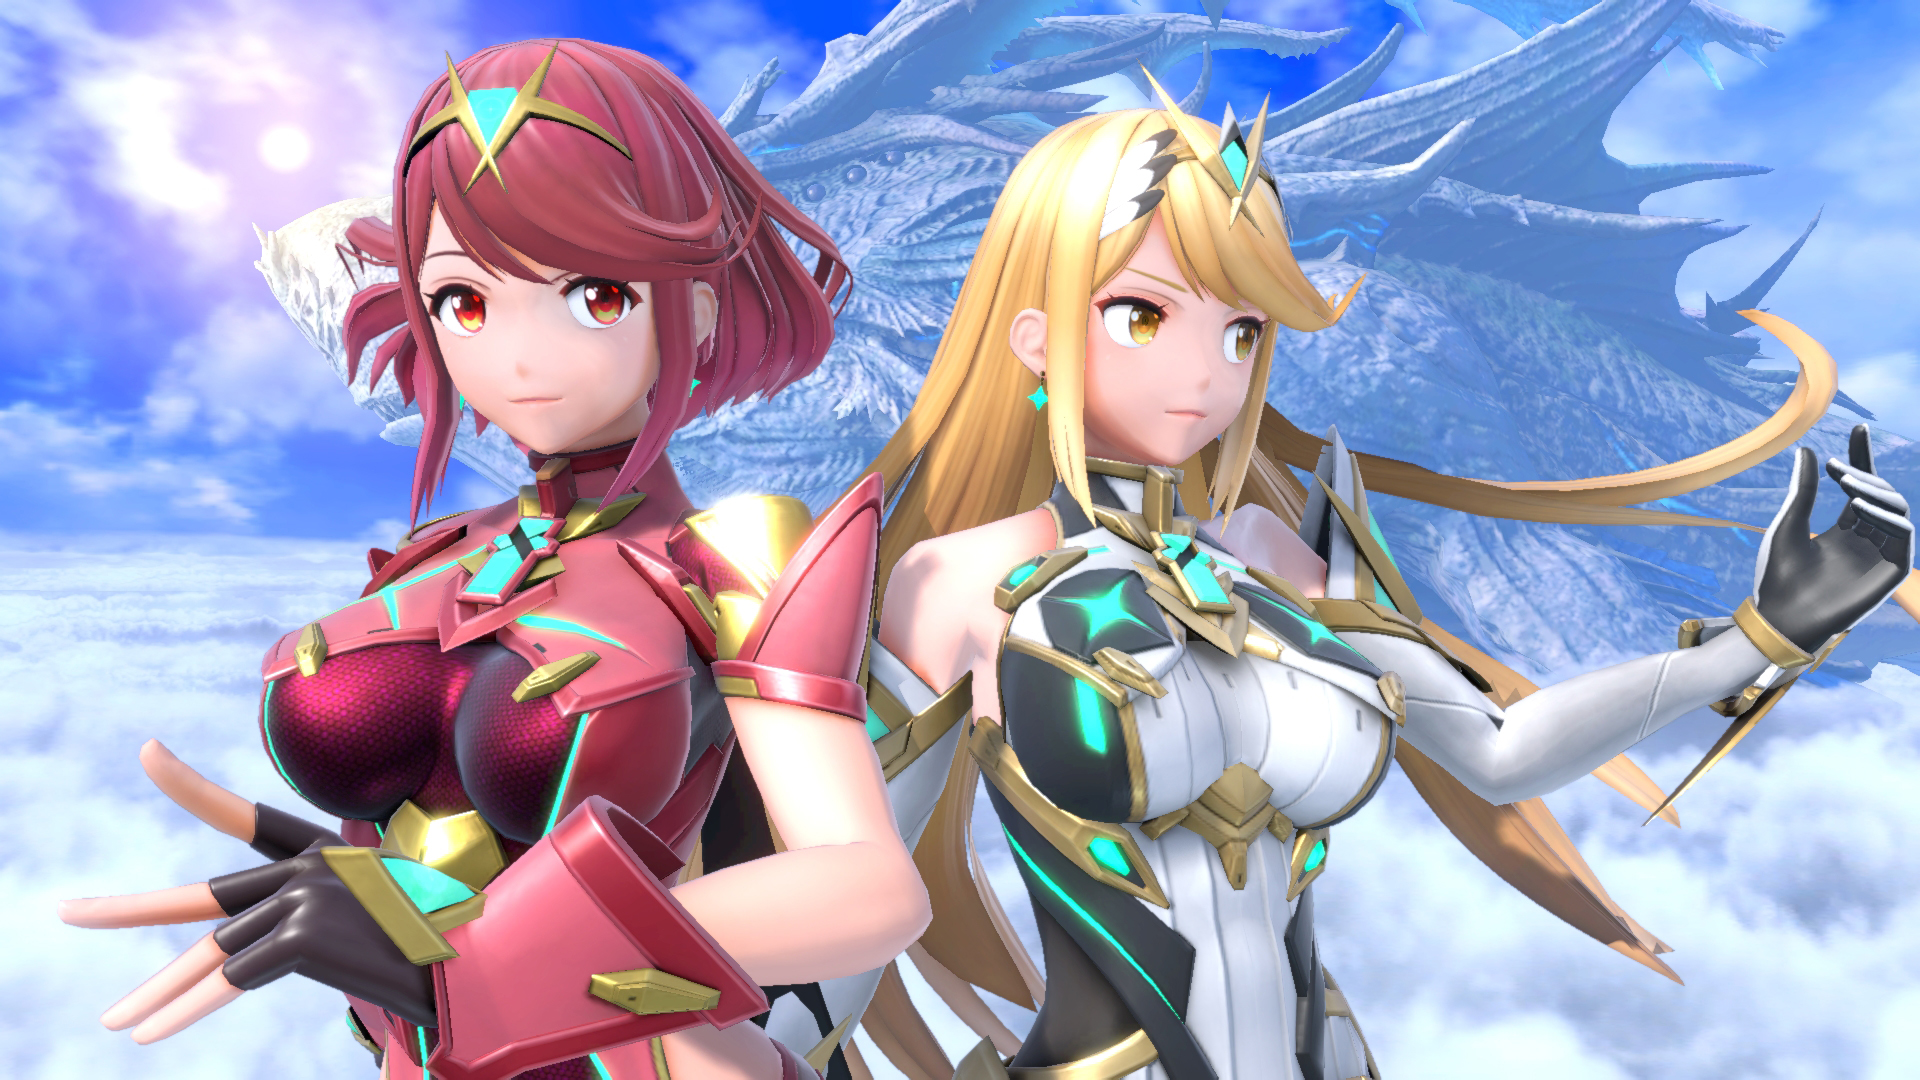 Take another look at Pyra and Mythra in Smash Bros. 